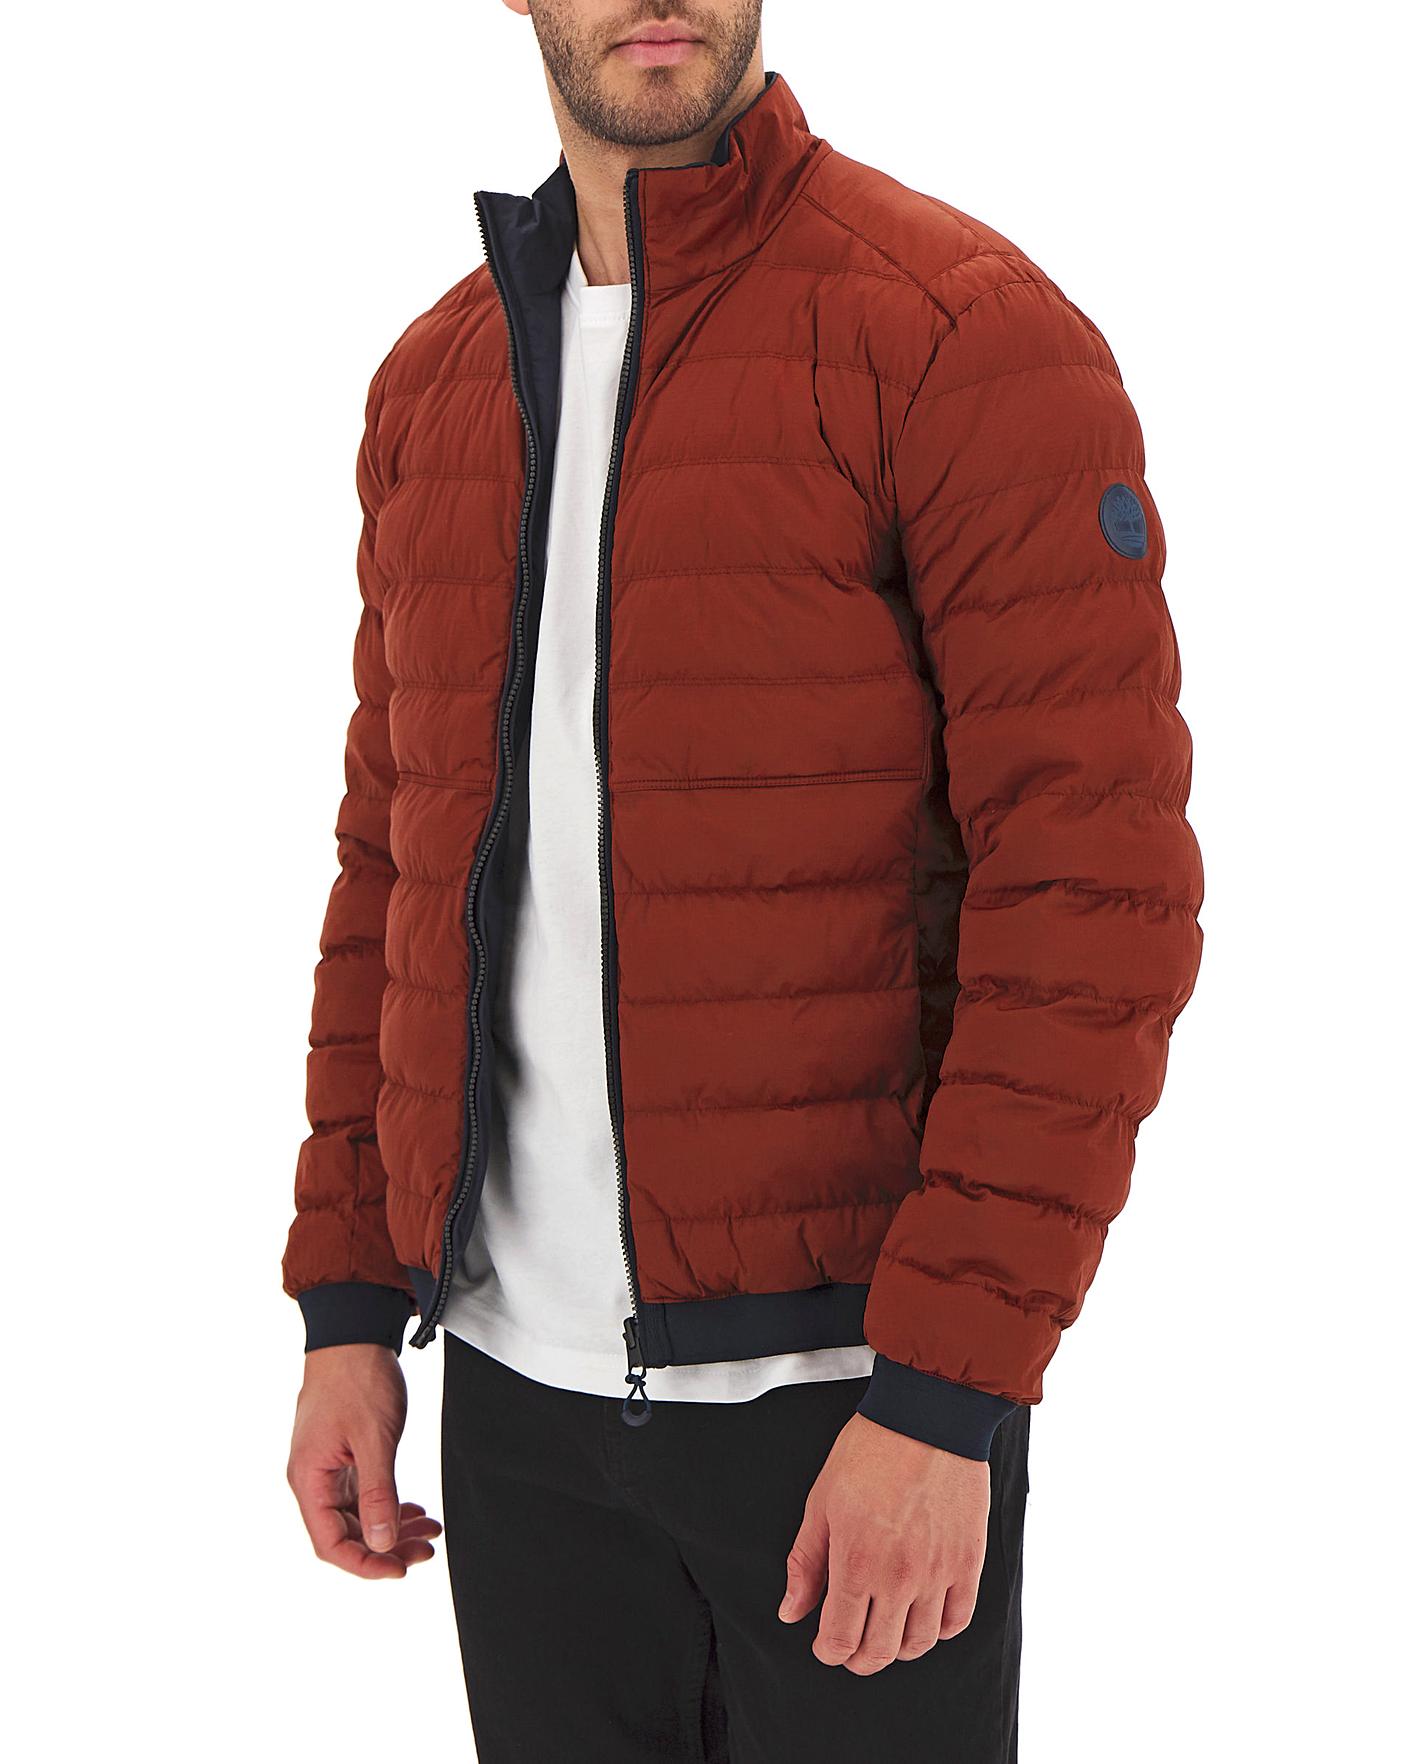 timberland compatible layering system jacket